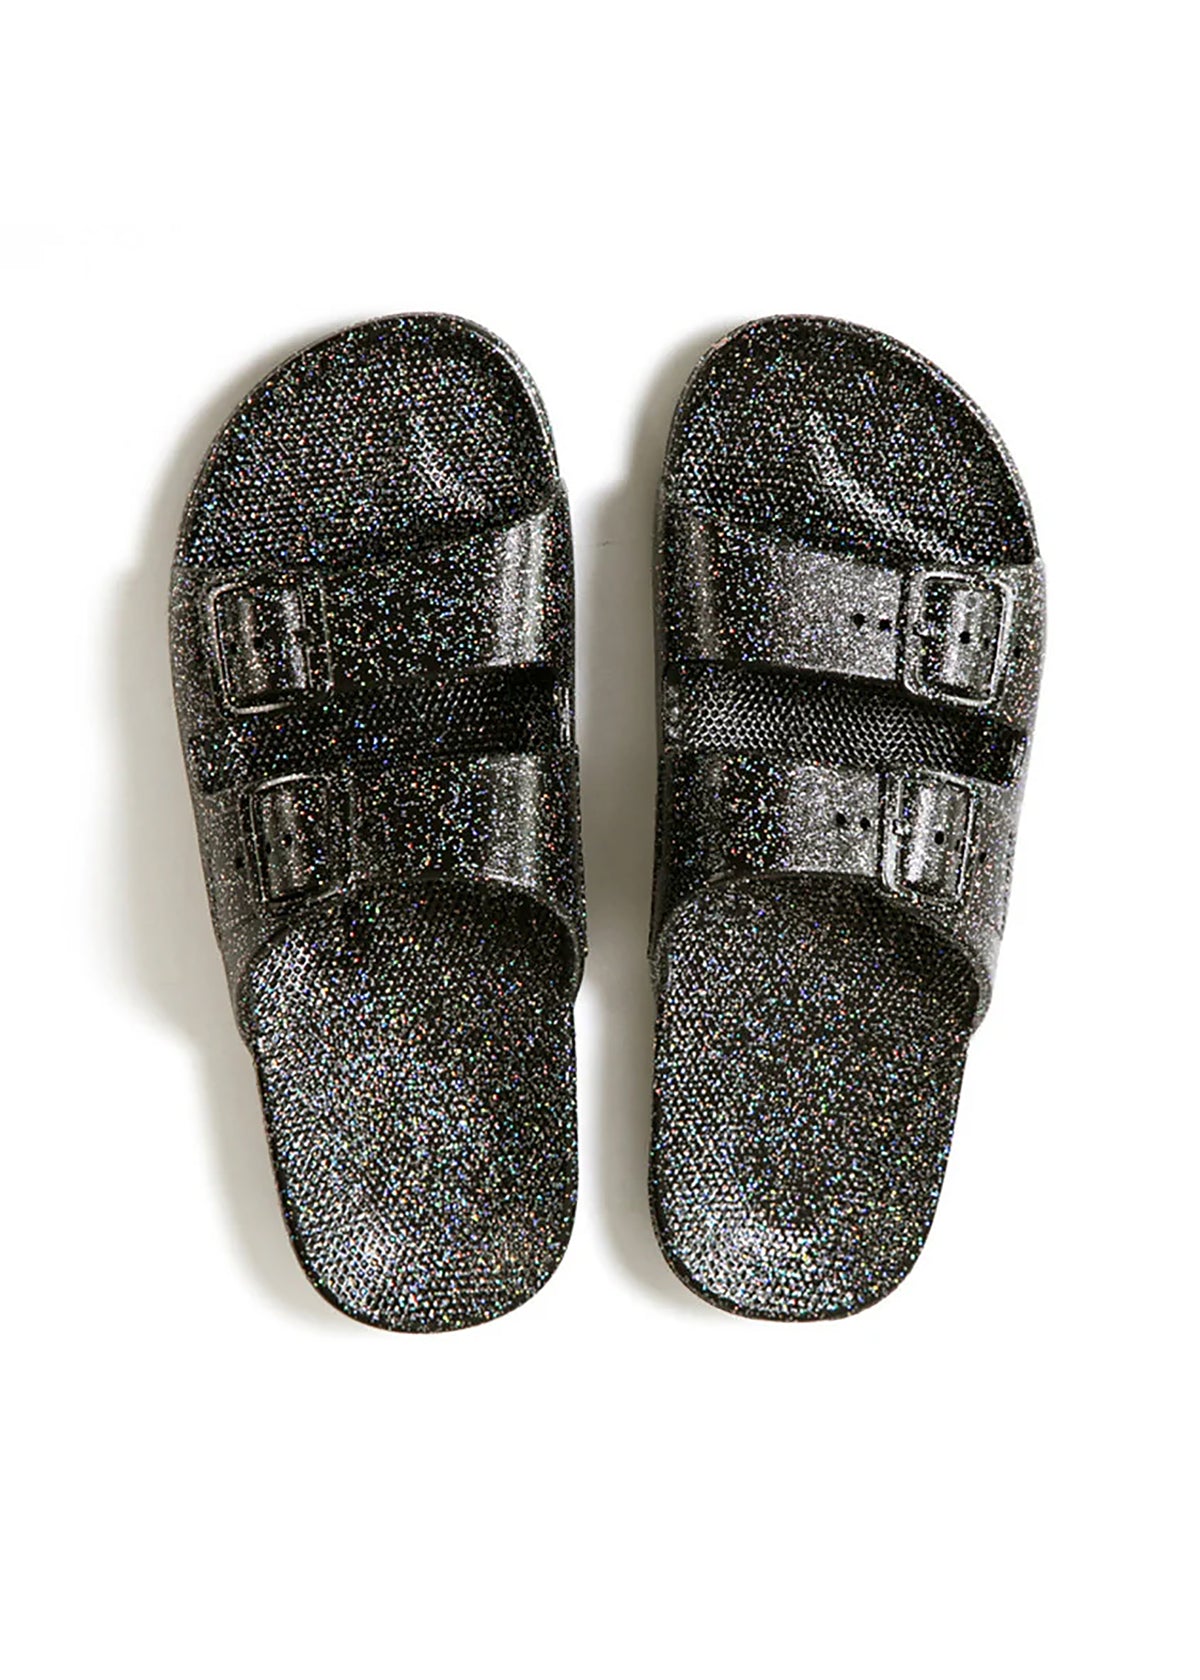 Freedom Moses sandals - wedges with two straps, Black Glitter